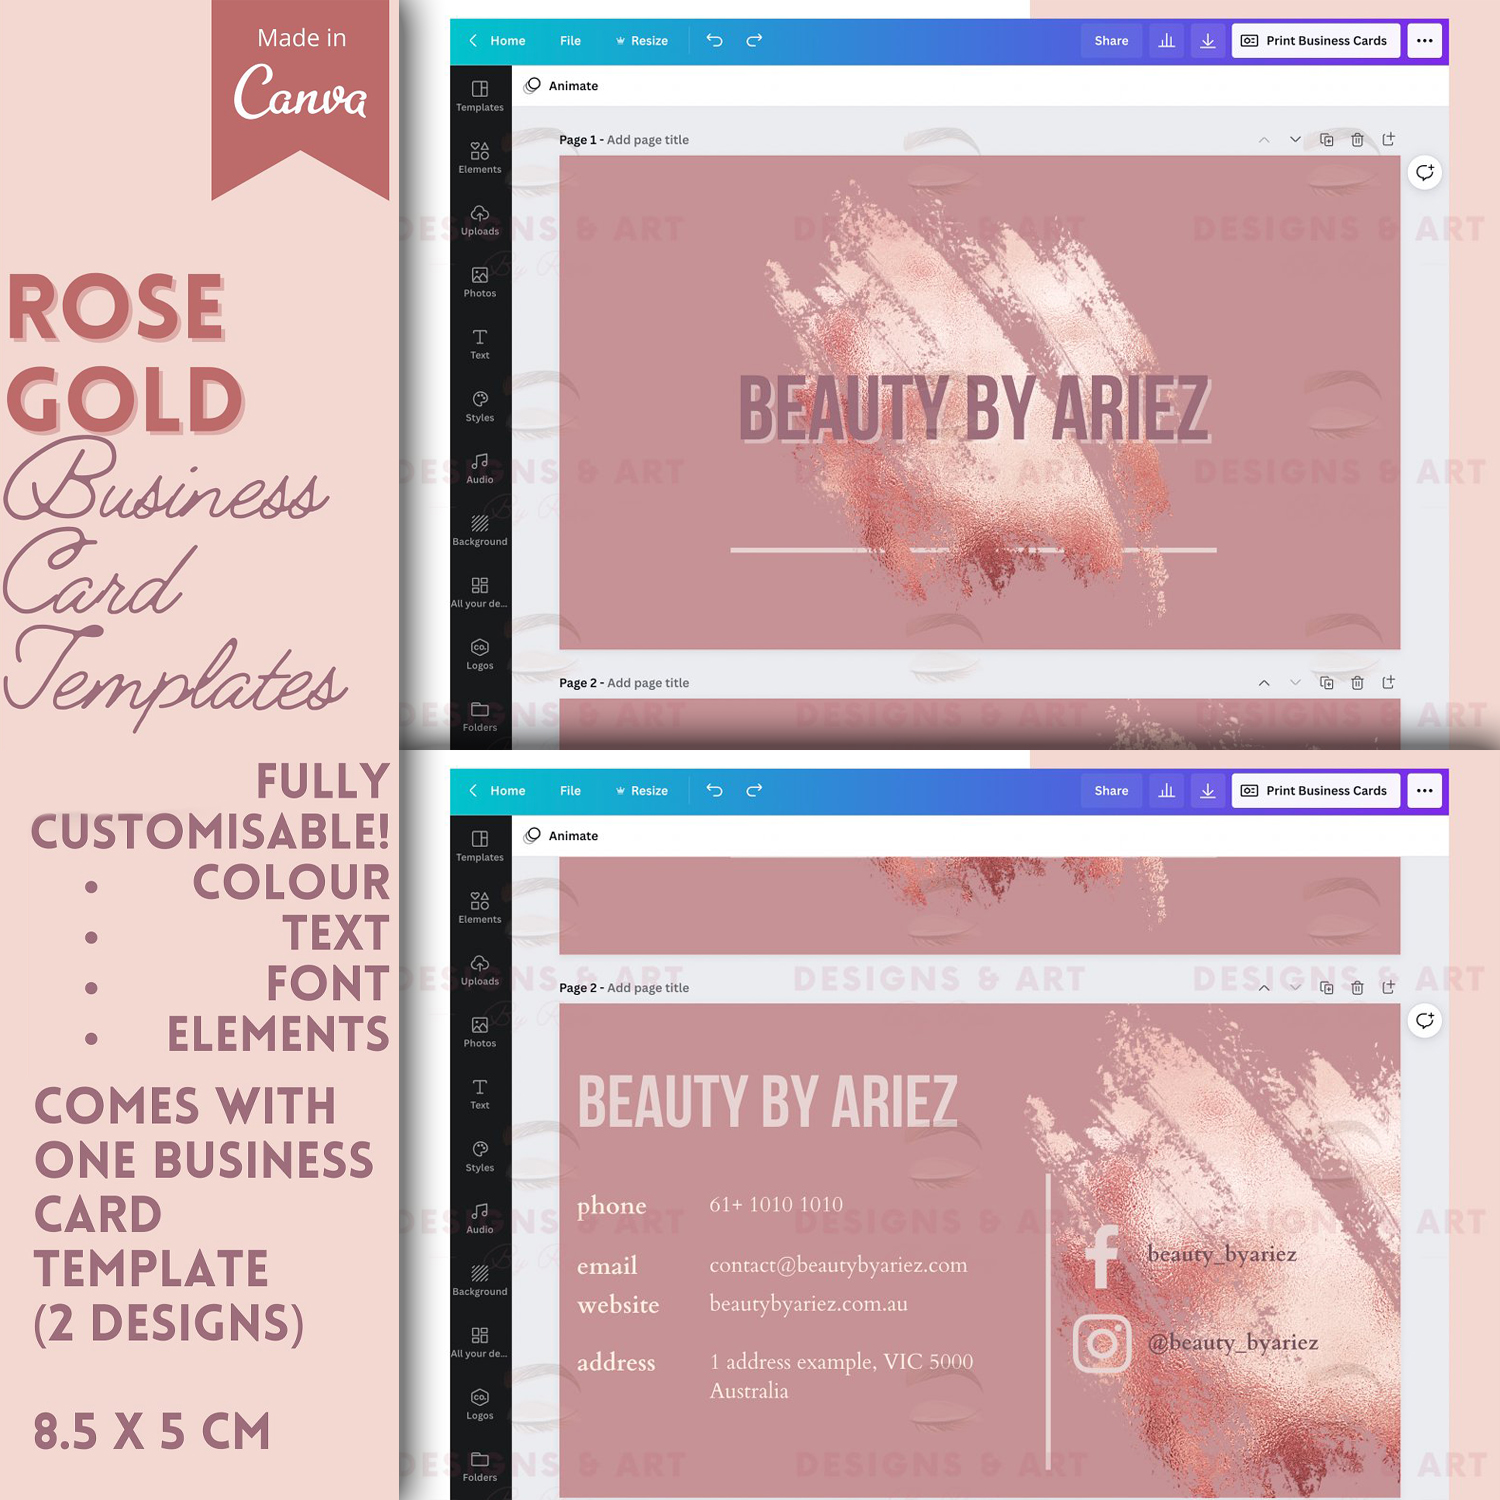 Preview rose gold business card templates.